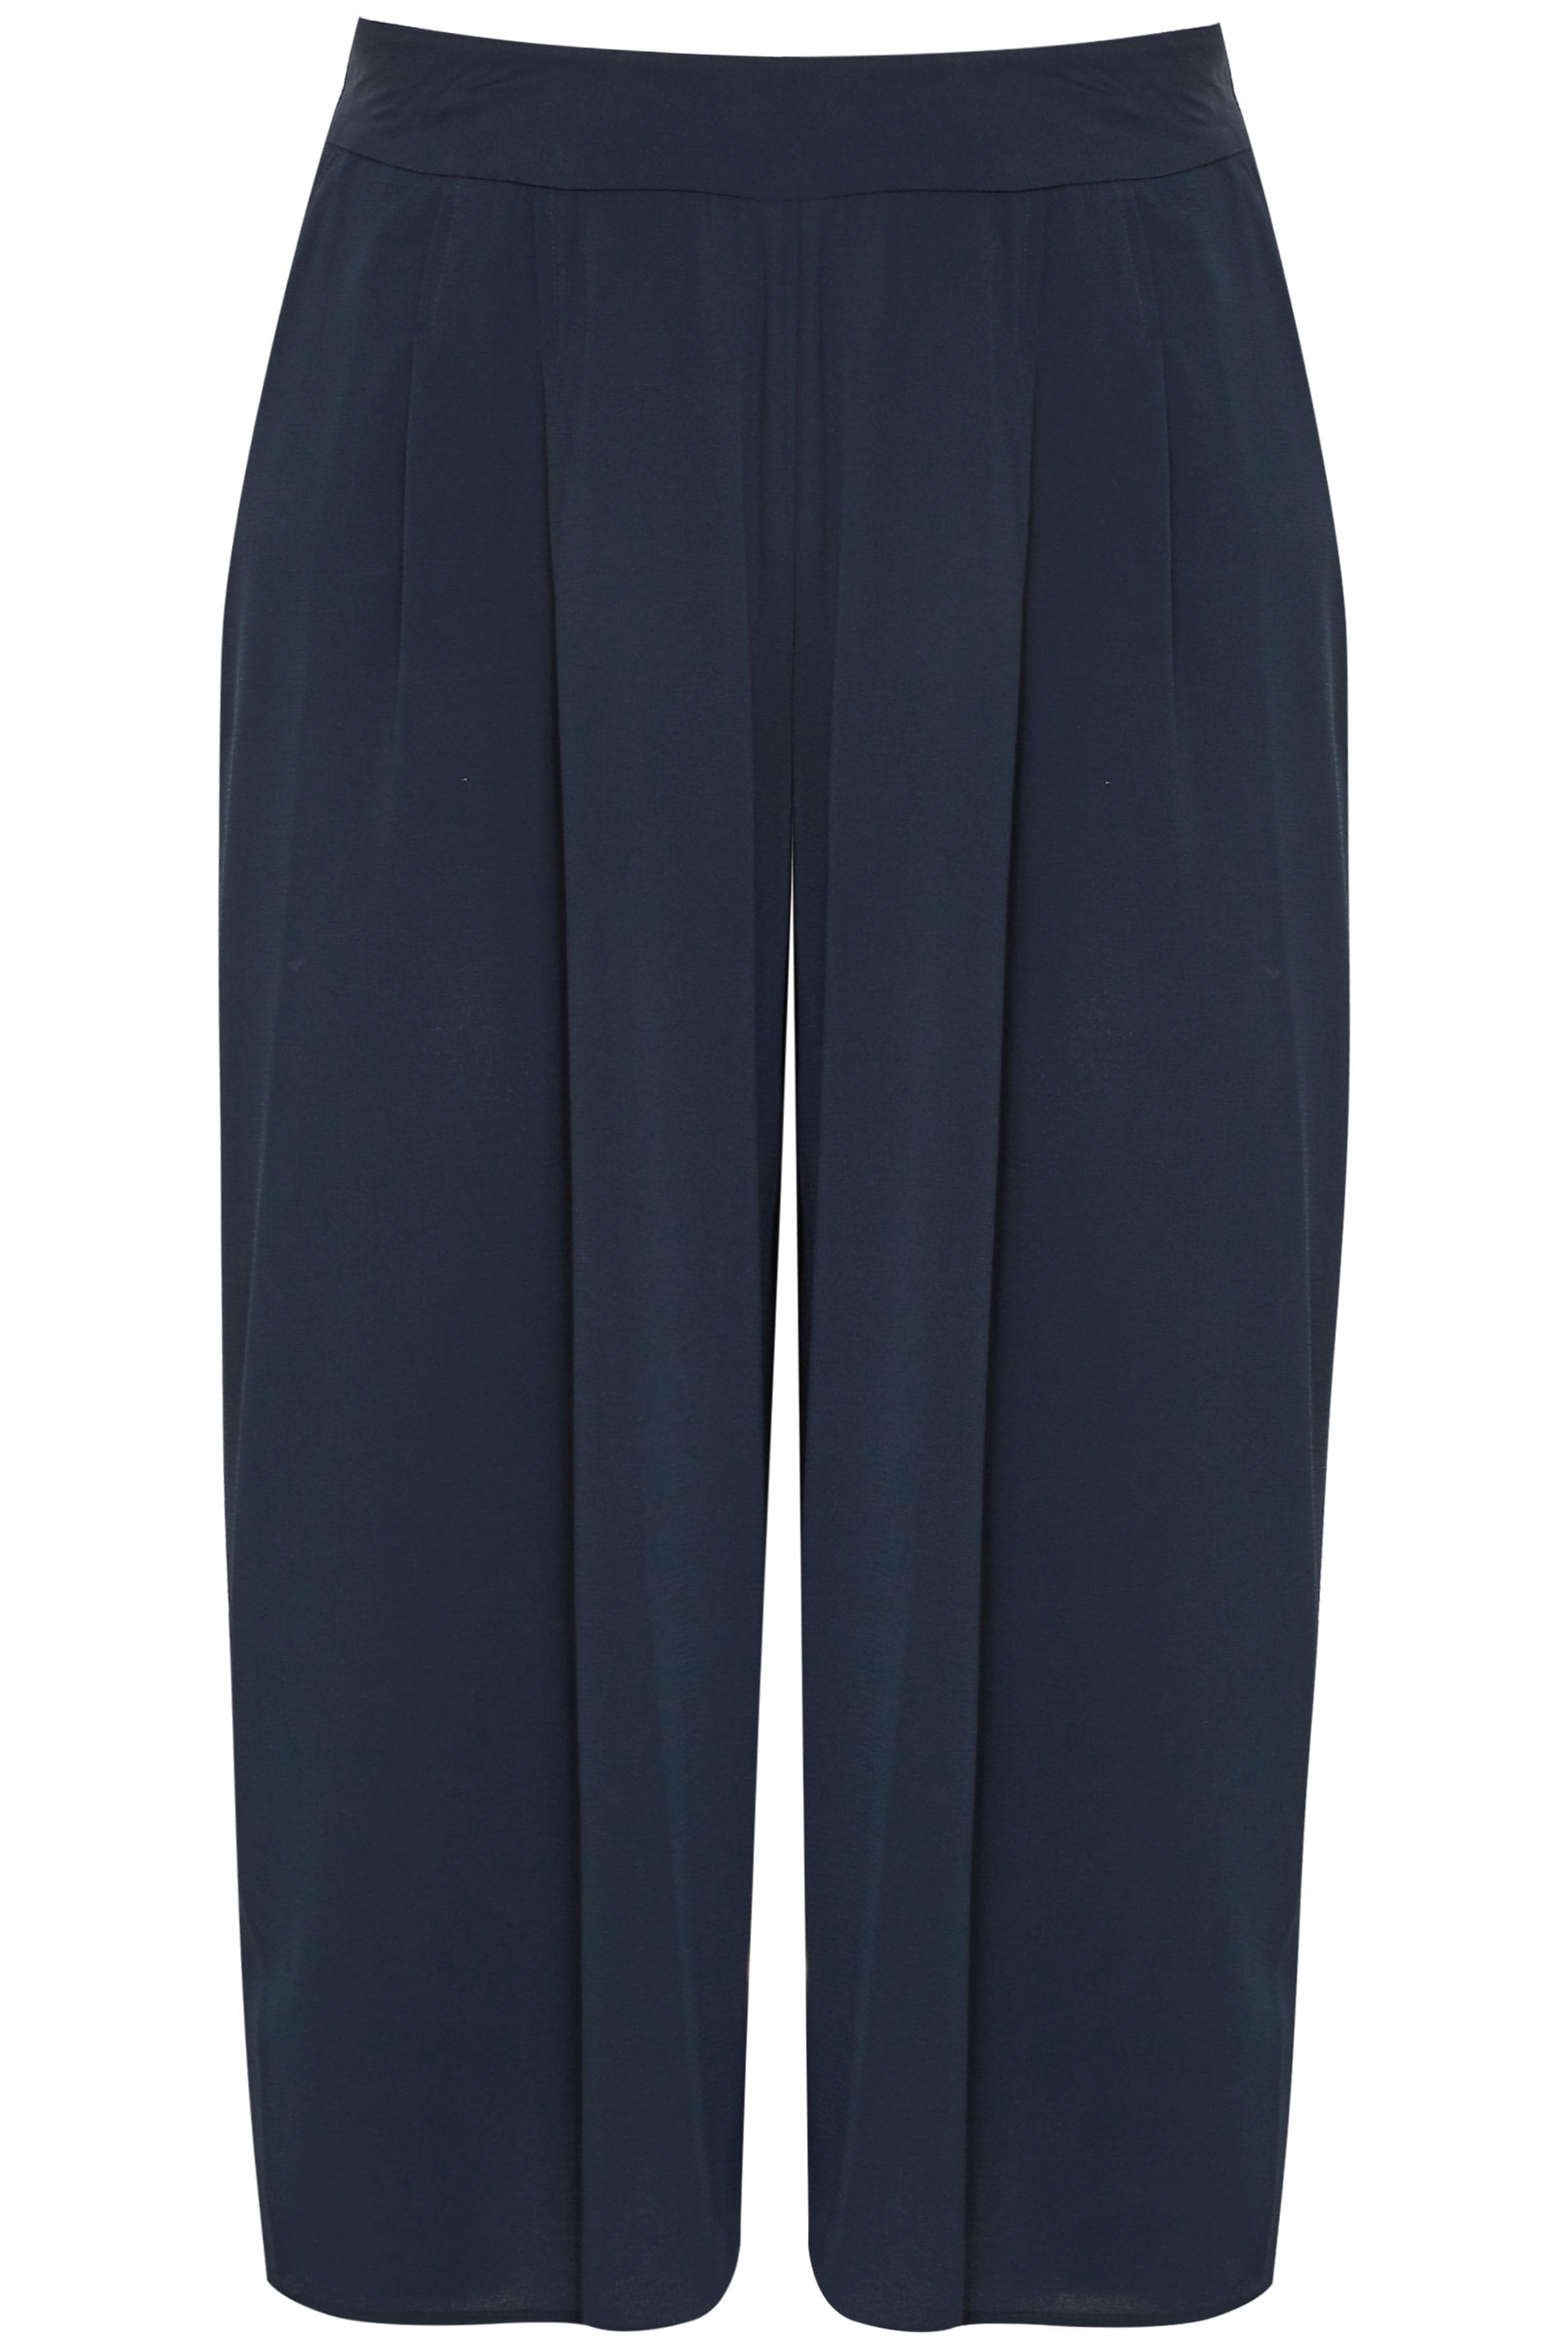 Navy Double Pleated Culottes | Yours Clothing